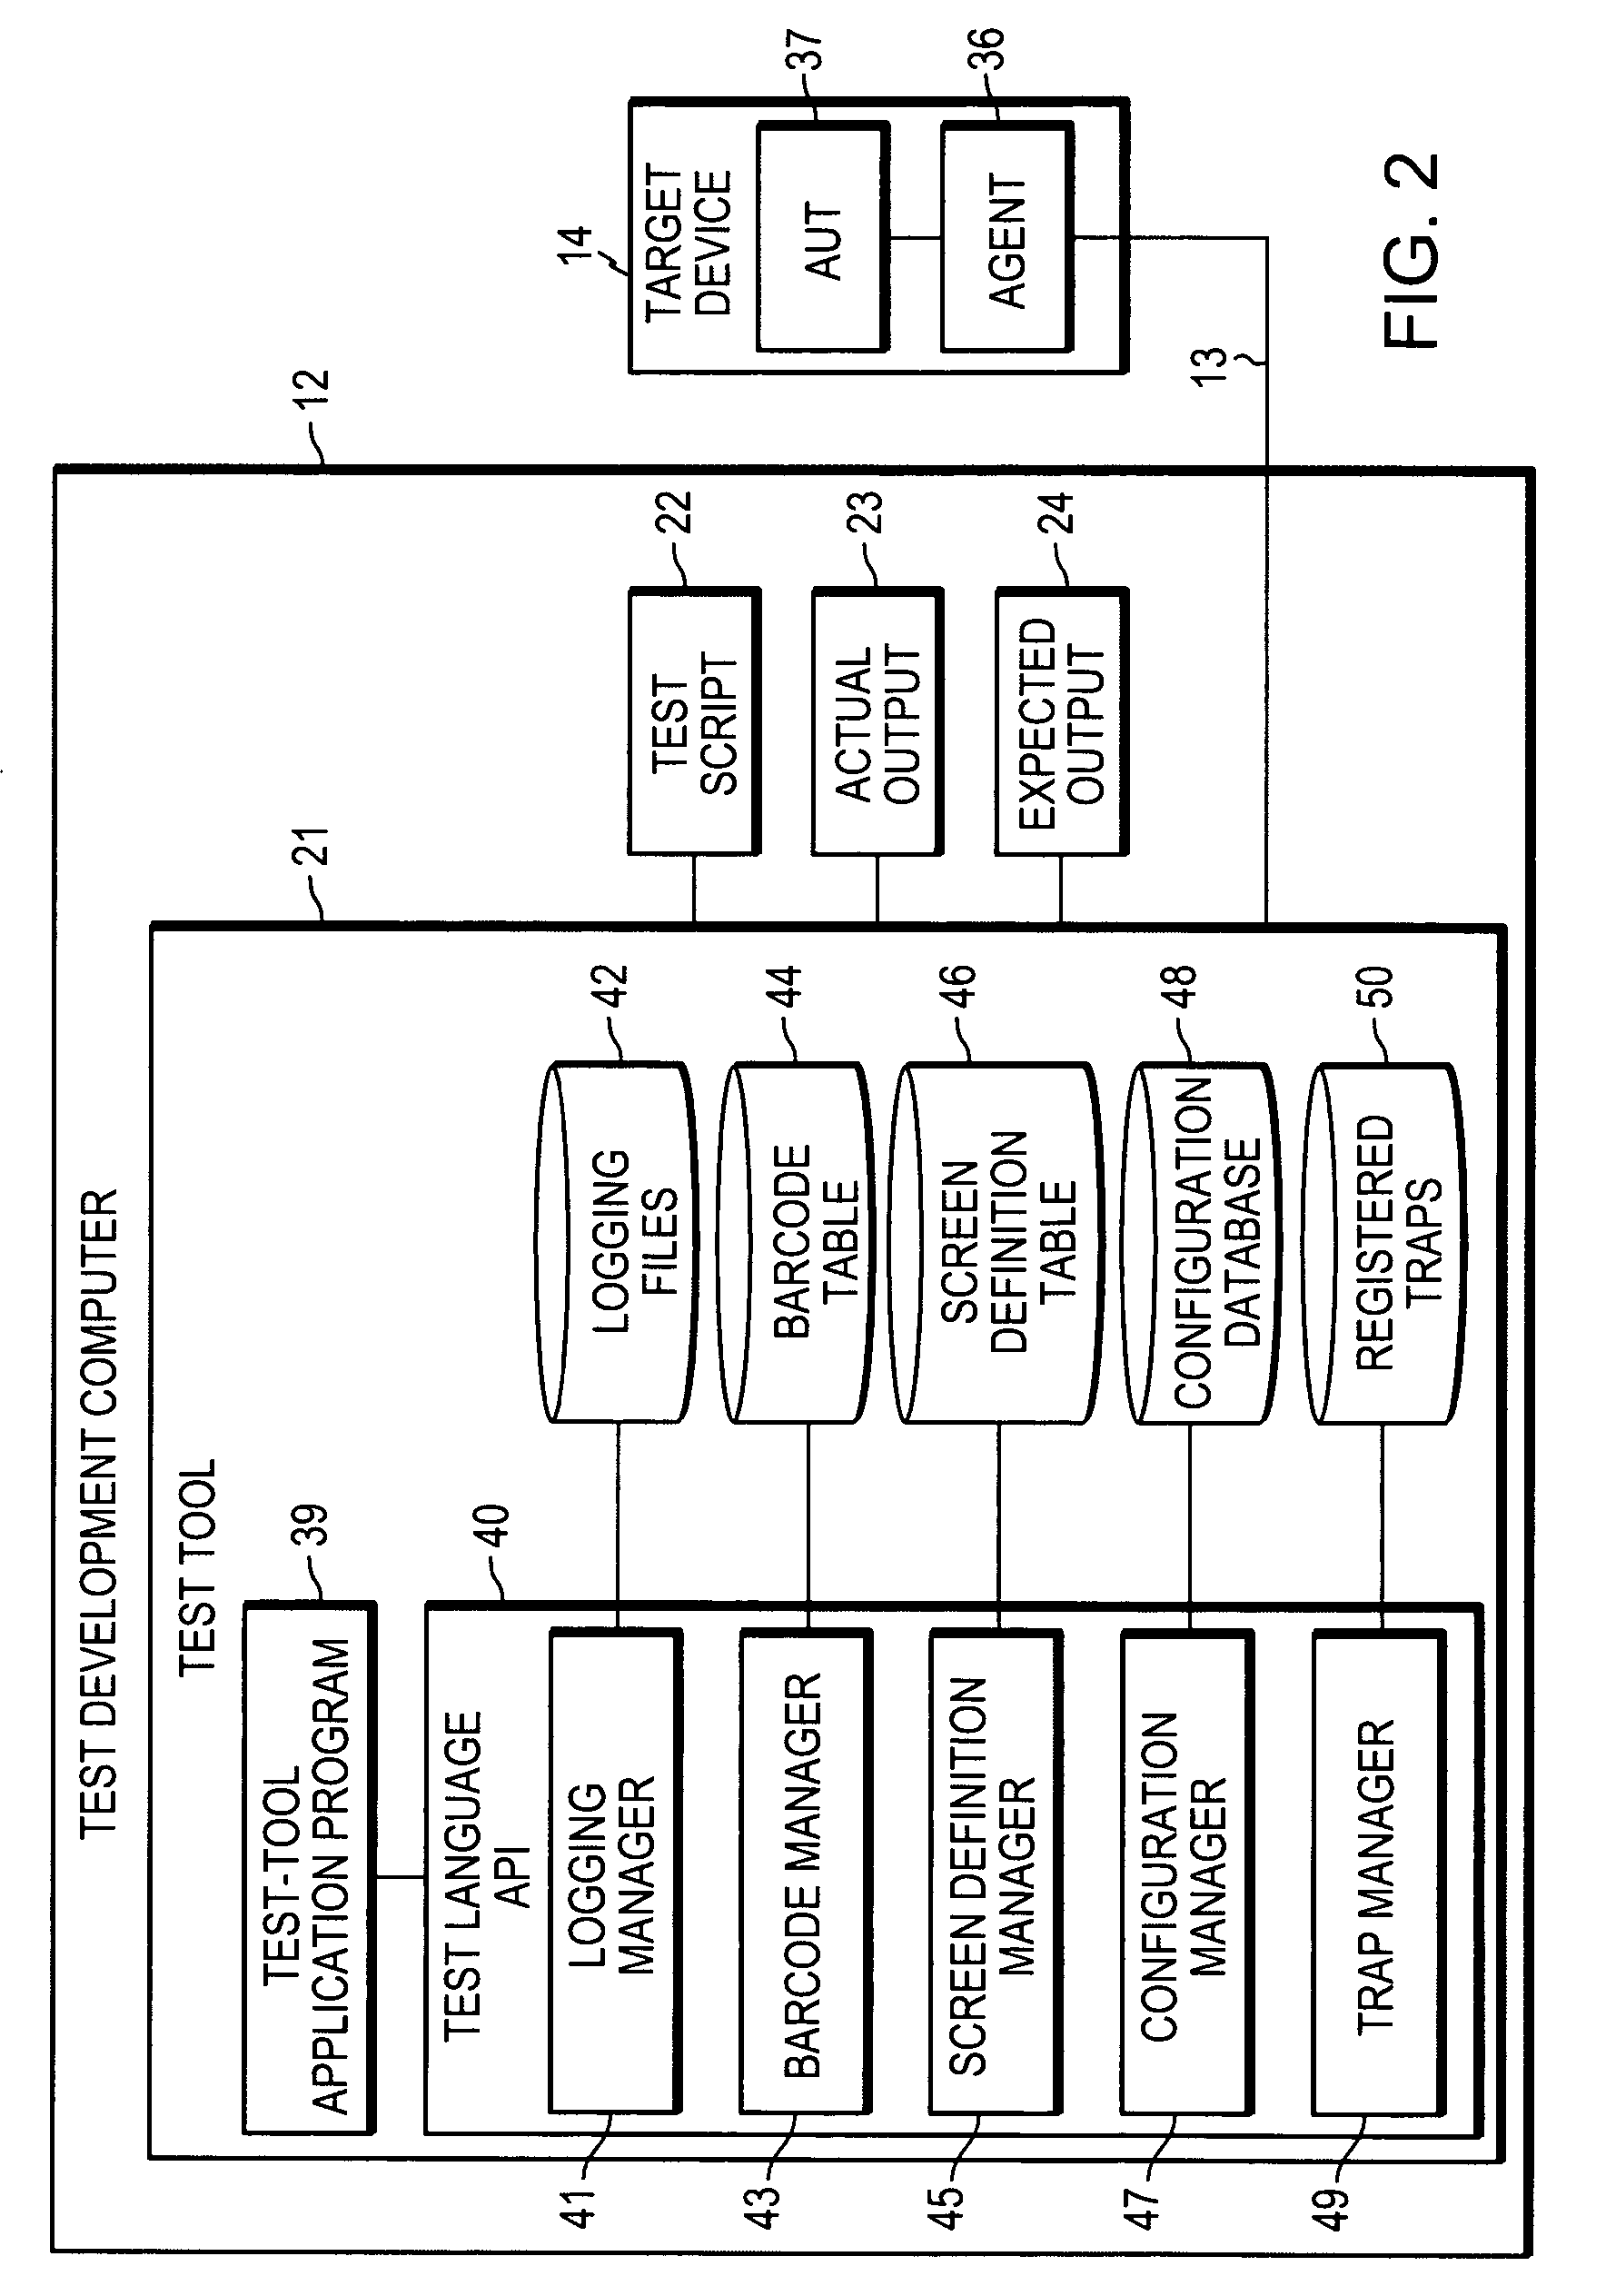 Automated test system for testing an application running in a windows-based environment and related methods